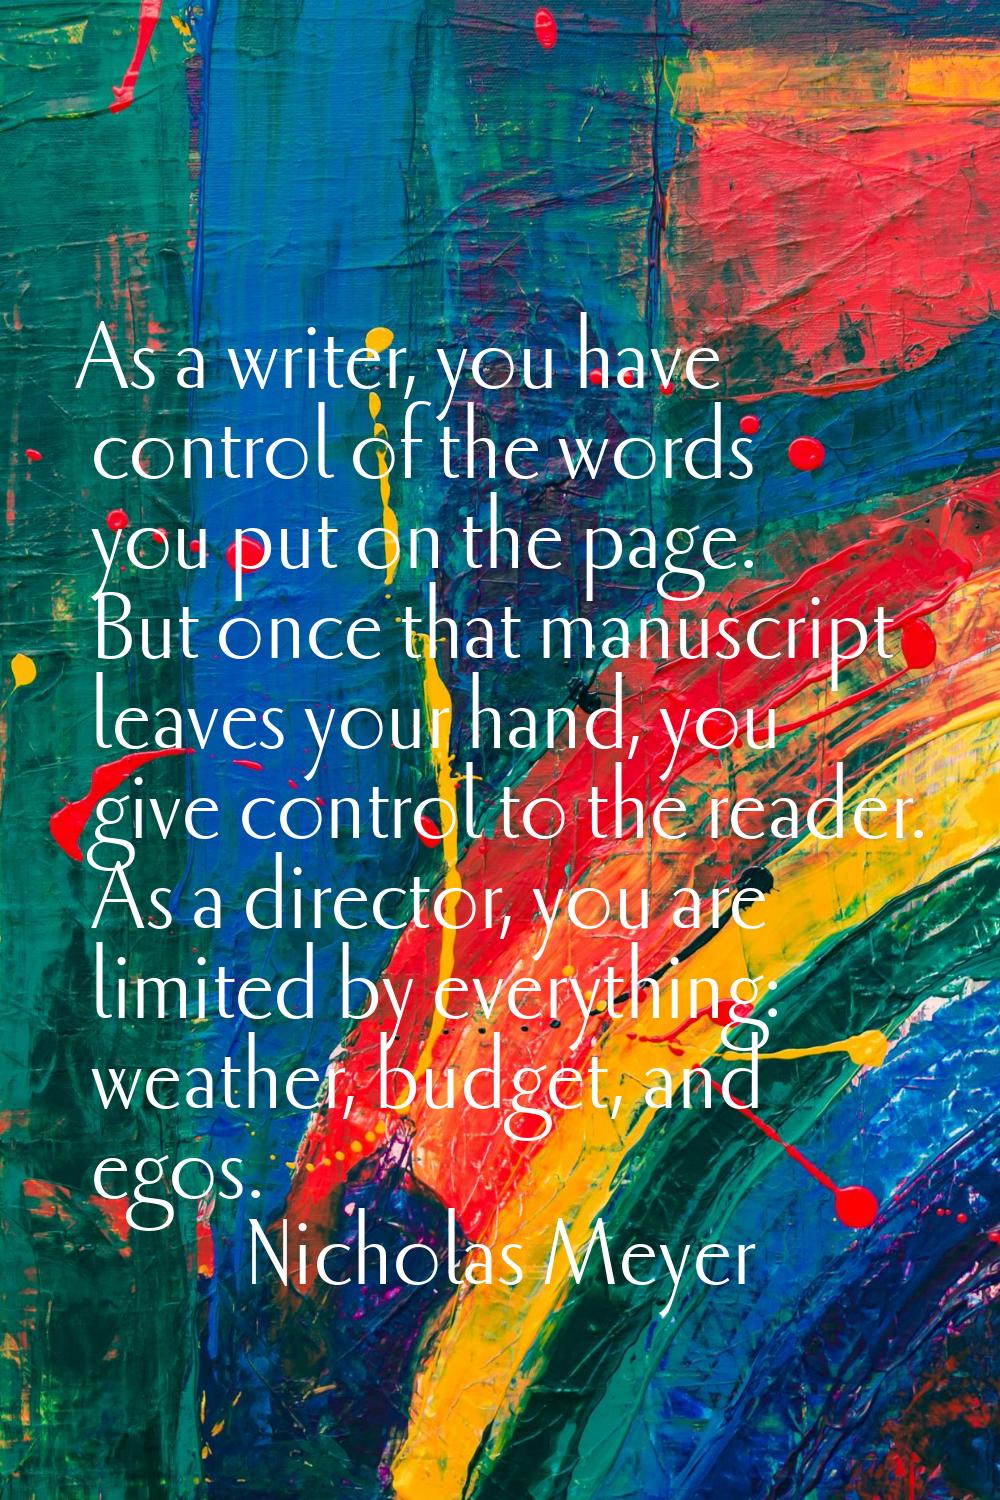 As a writer, you have control of the words you put on the page. But once that manuscript leaves you